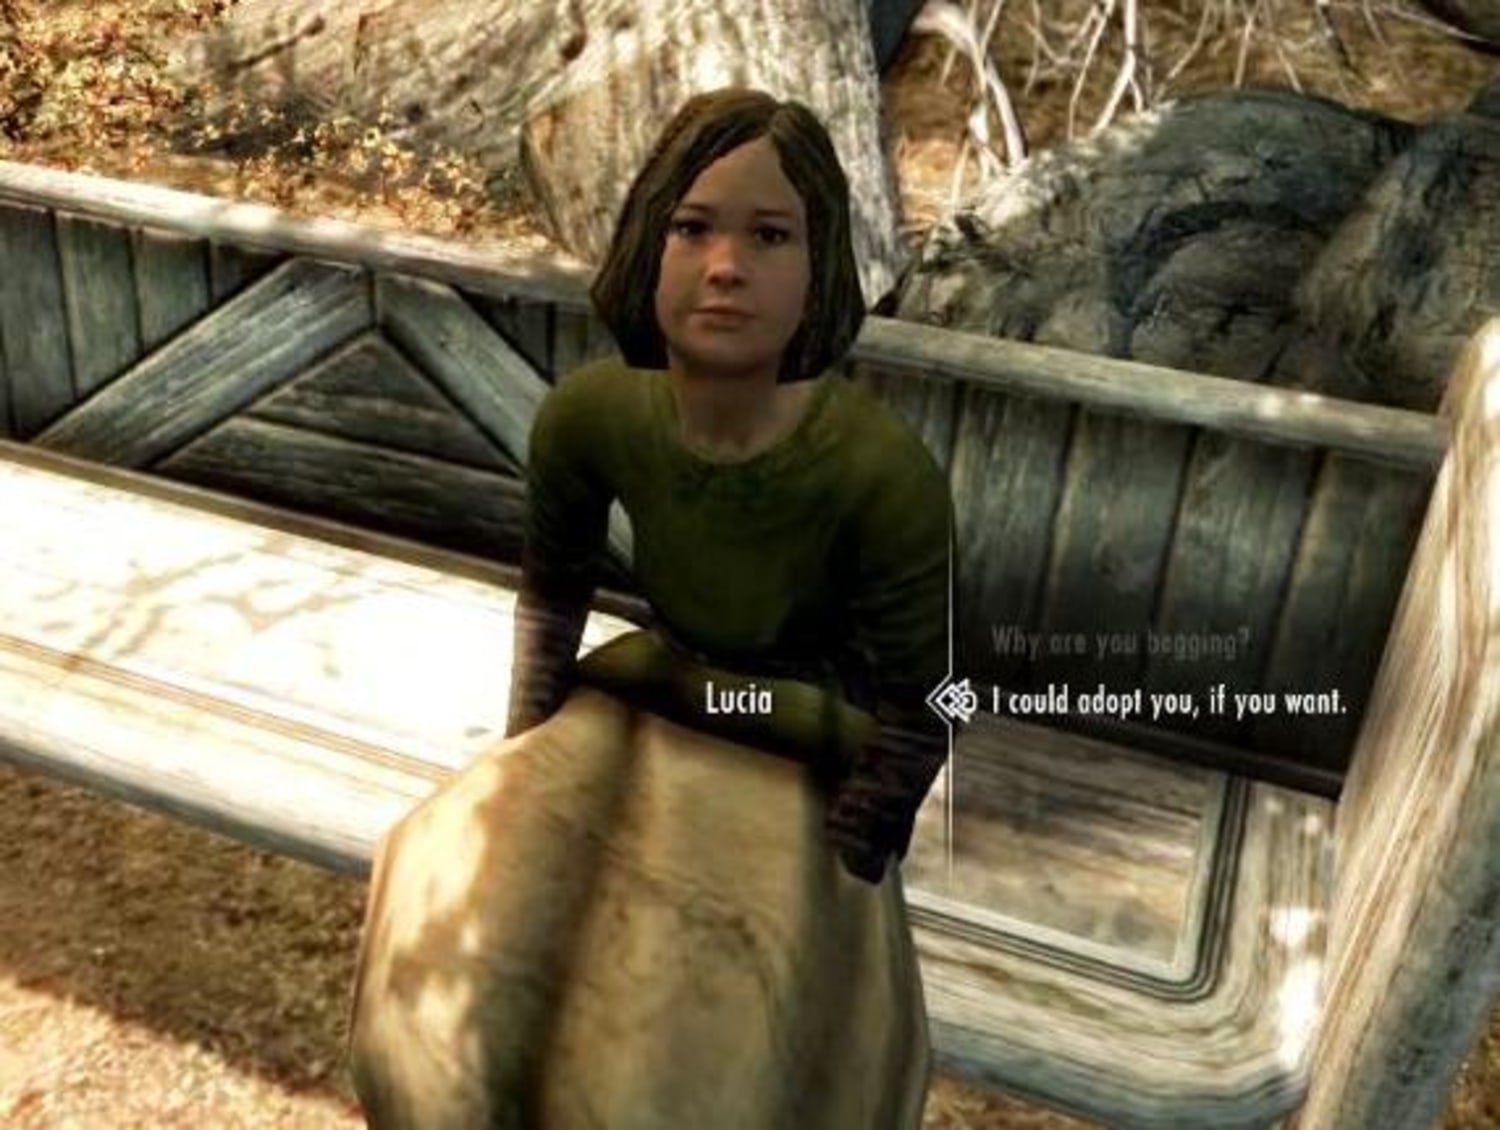 brandi trotter recommends where is lucia skyrim pic